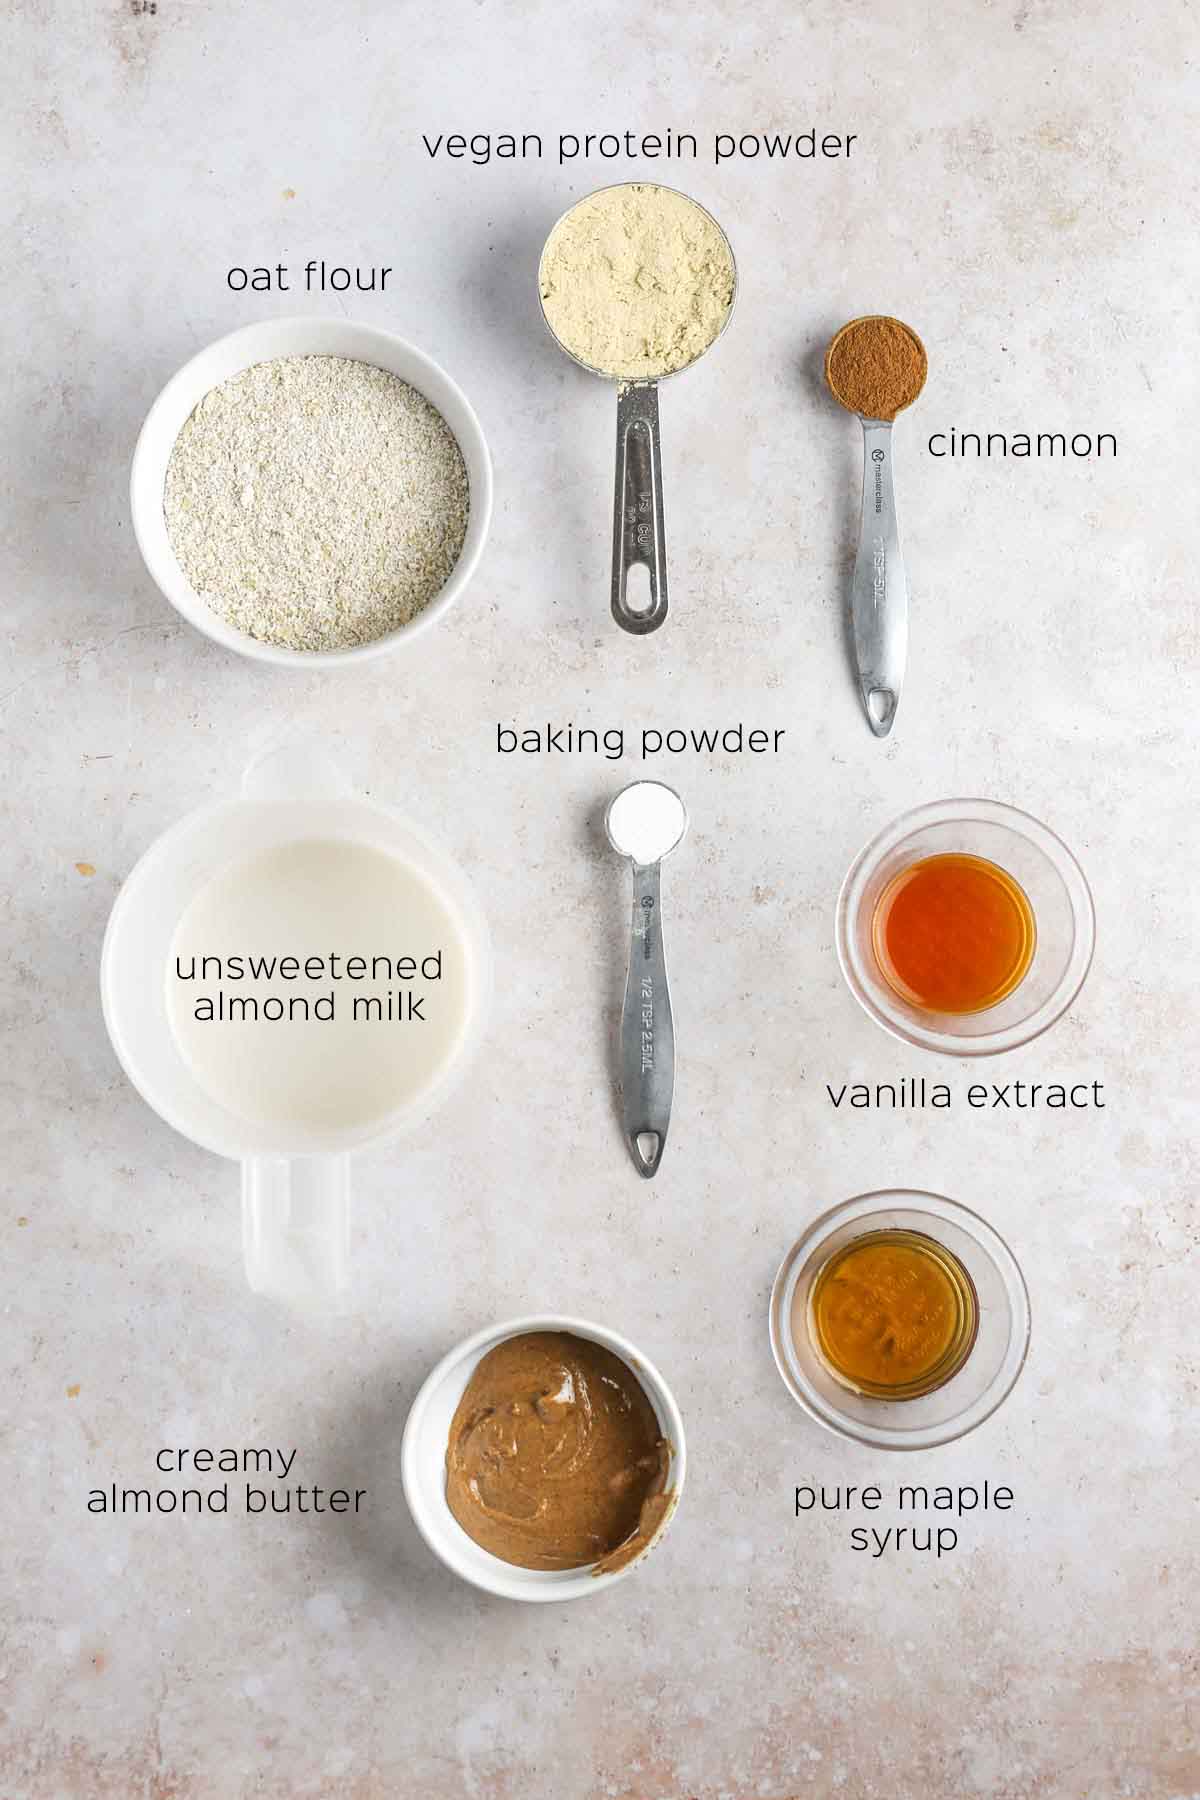 all ingredients to make the waffles prepared in small dishes and measuring cups, shown on a cream marble surface.